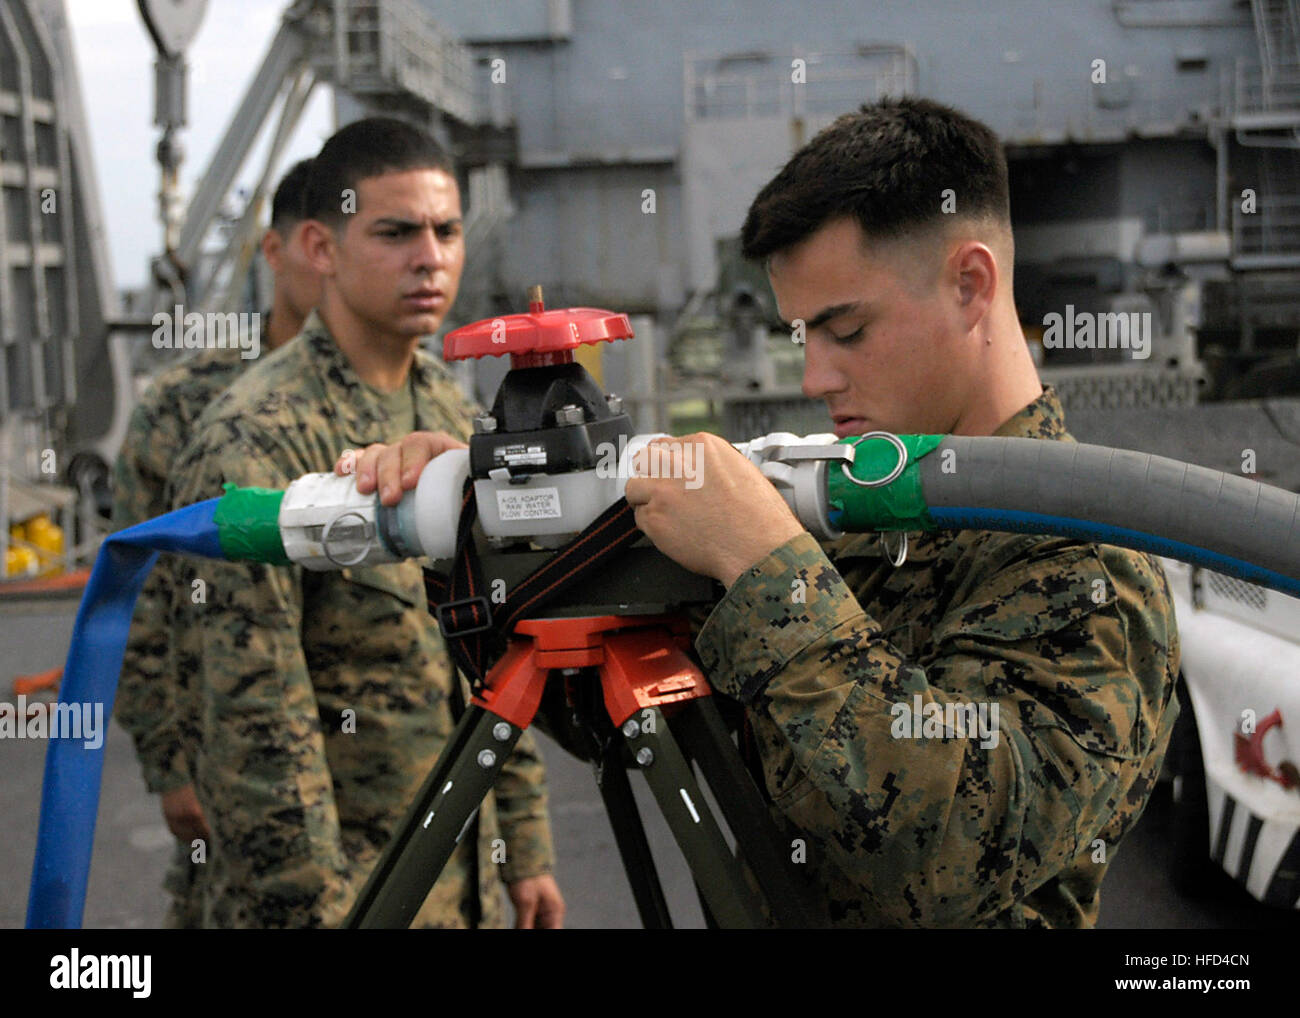 080523-N-5067K-289 ANDAMAN SEA (May 23, 2008) (May 17, 2008) U.S. Marine Lance Cpl. Alex Camargo, left, and Lance Cpl. Michael Dealba connect an intake suction hose to a Tactical Water Purifier System aboard the amphibious ship USS Harpers Ferry (LSD 49). The mobile water system can produce up to 1200 gallons of potable water under ideal conditions. Harpers Ferry is part of Joint Task Force Caring Response and is standing by in international waters off the coast of Burma preparing for a humanitarian assistance operation to help victims of Cyclone Nargis. U.S. Navy photo by Mass Communication S Stock Photo